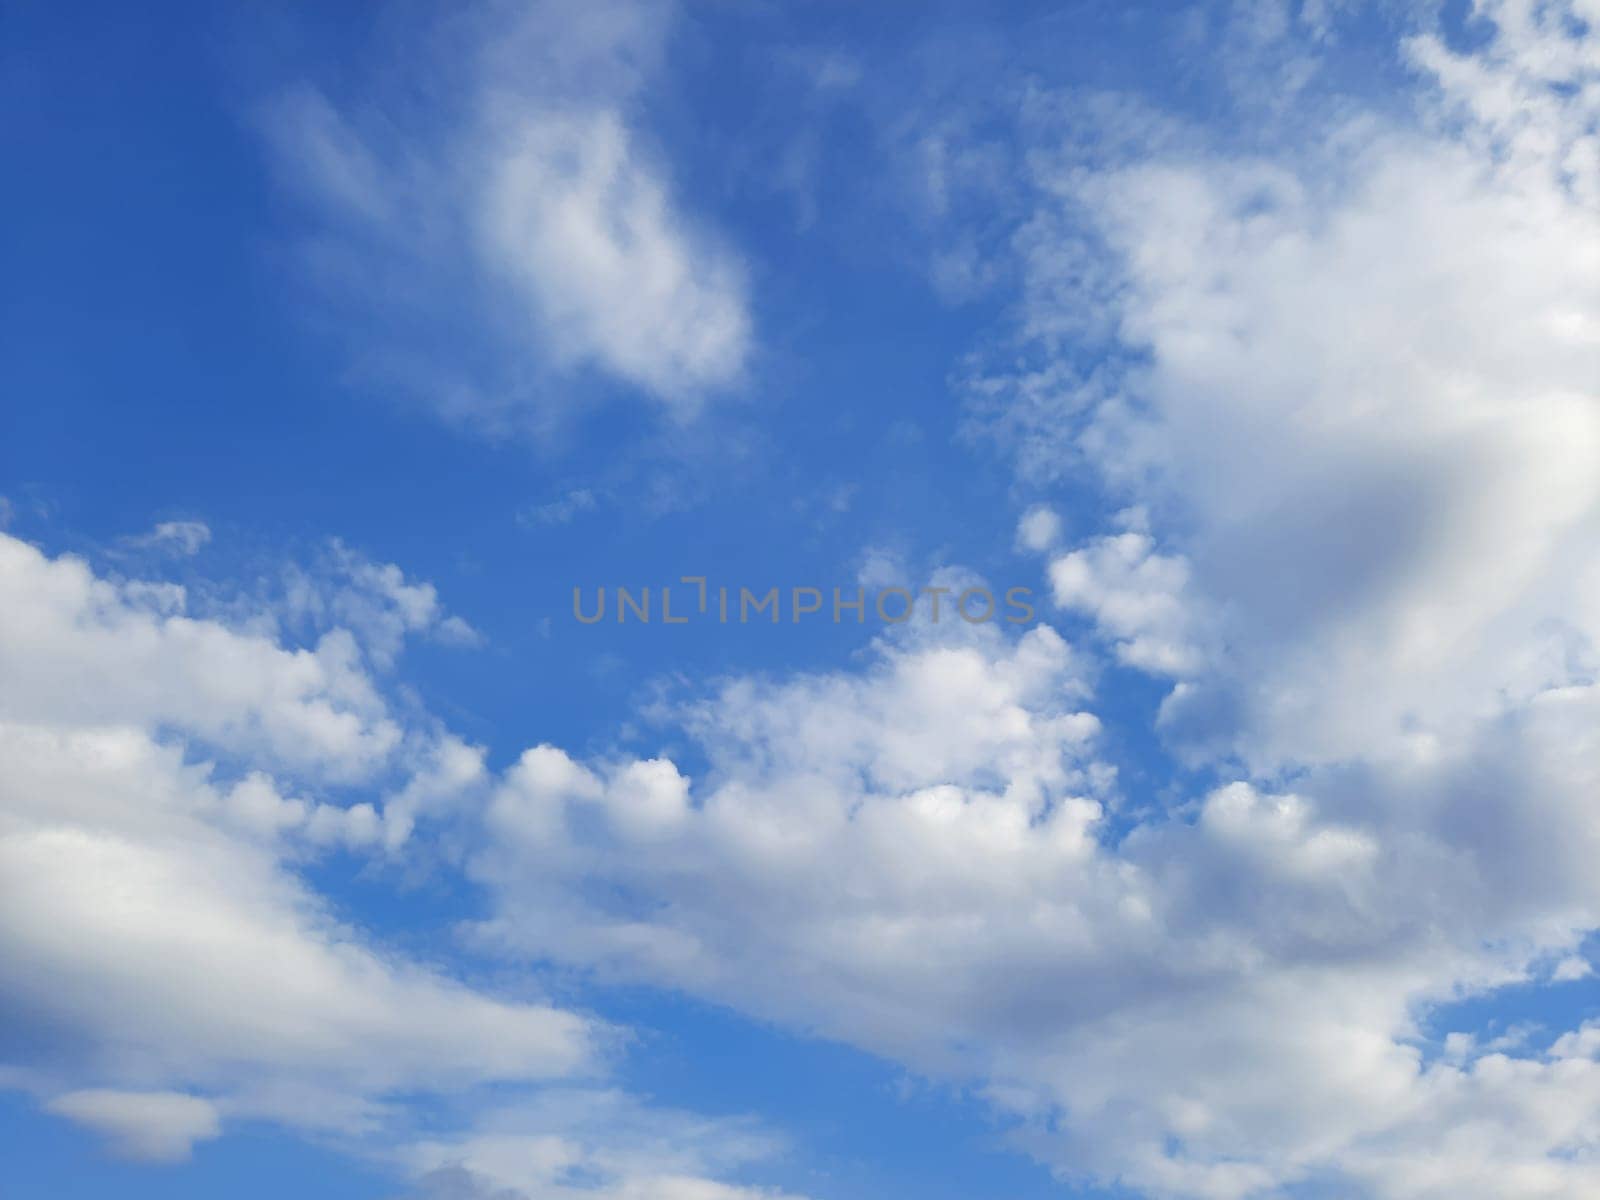 Beauty cloud against a blue sky background. Sky slouds. Blue sky with cloudy weather, nature cloud. White clouds, blue sky and sun. by Costin